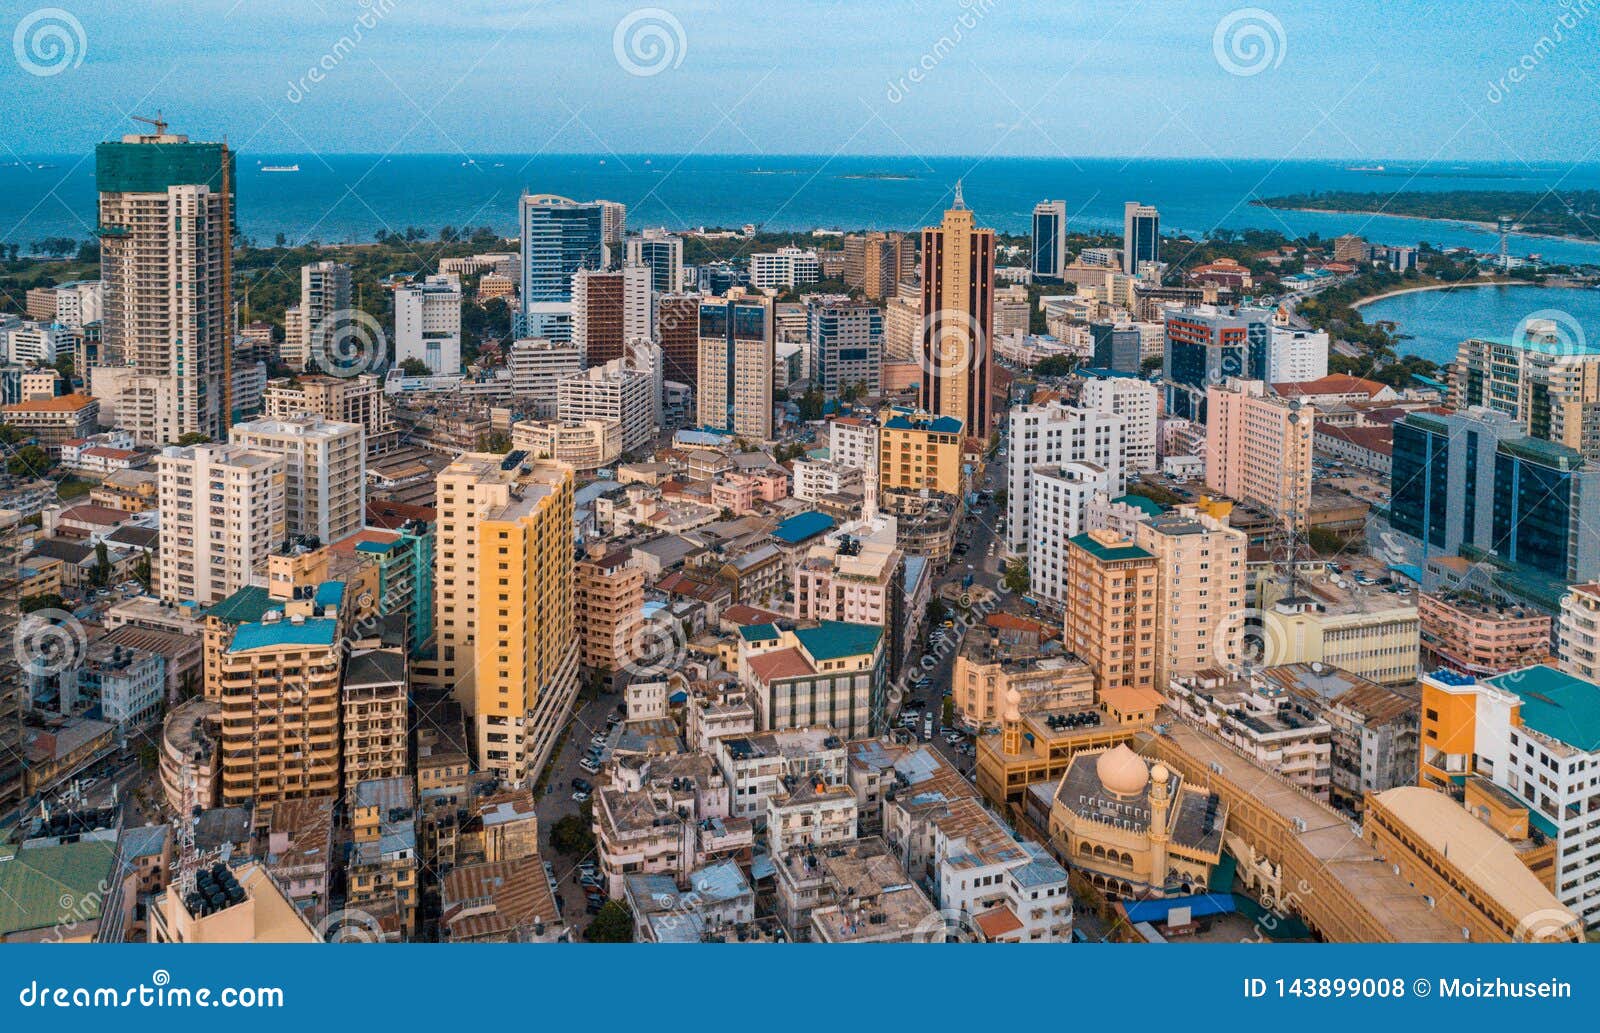 aerial view of the haven of peace, city of dar es salaam